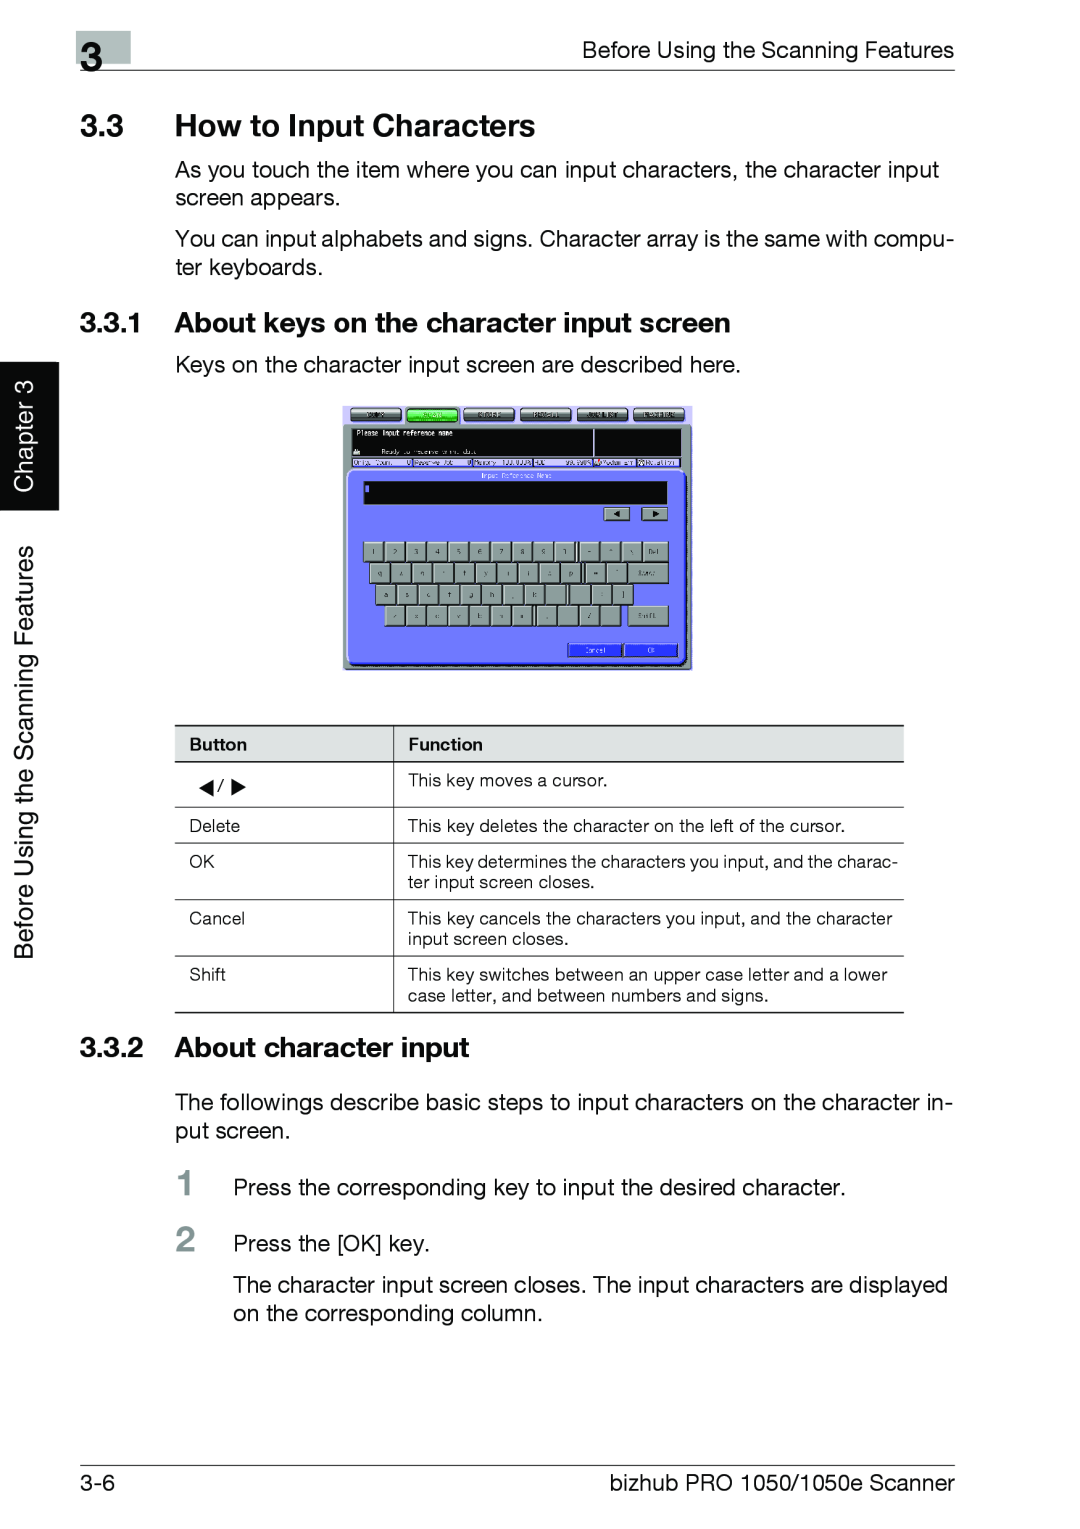 Konica Minolta 1050 3.3How to Input Characters, 3.3.1About keys on the character input screen, 3.3.2About character input 